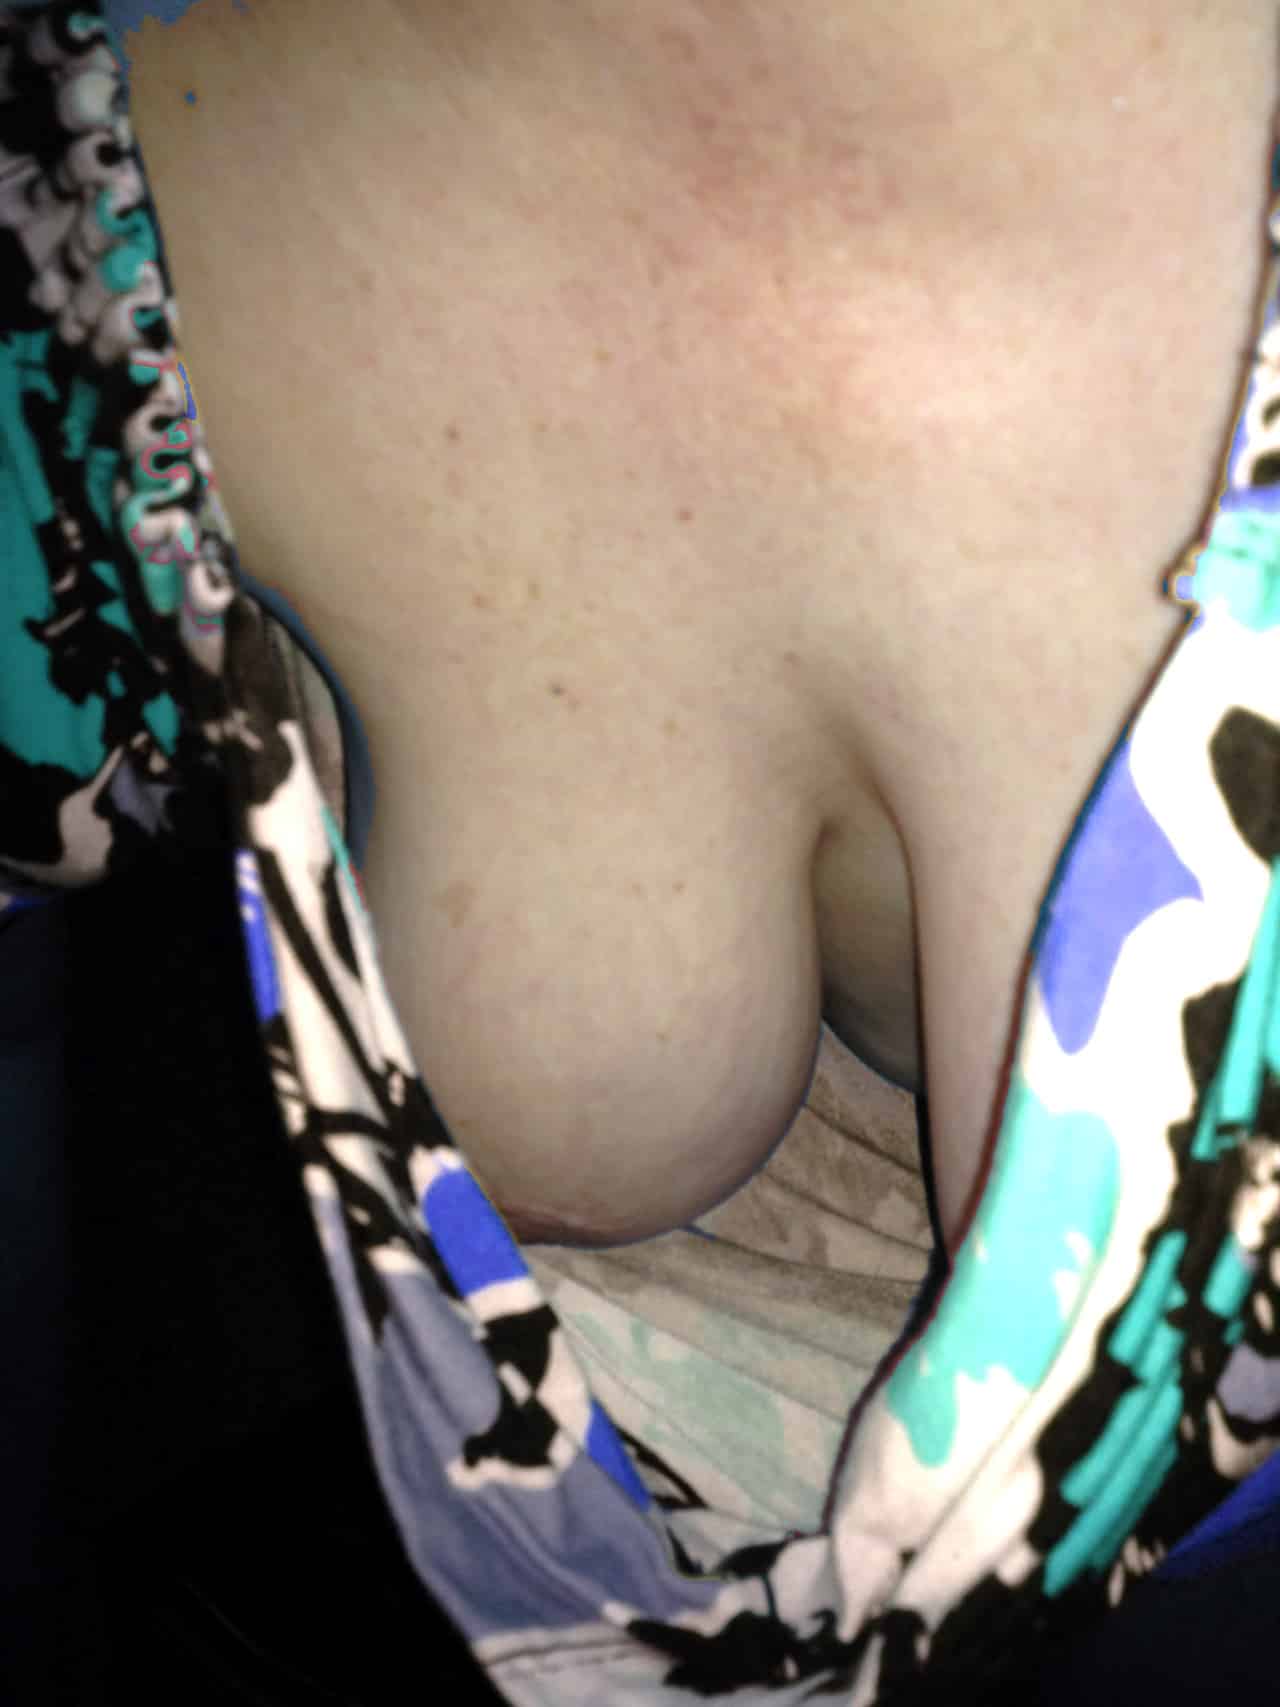 nudes mature hotwife boobs flash babes Who loves downblouse pics